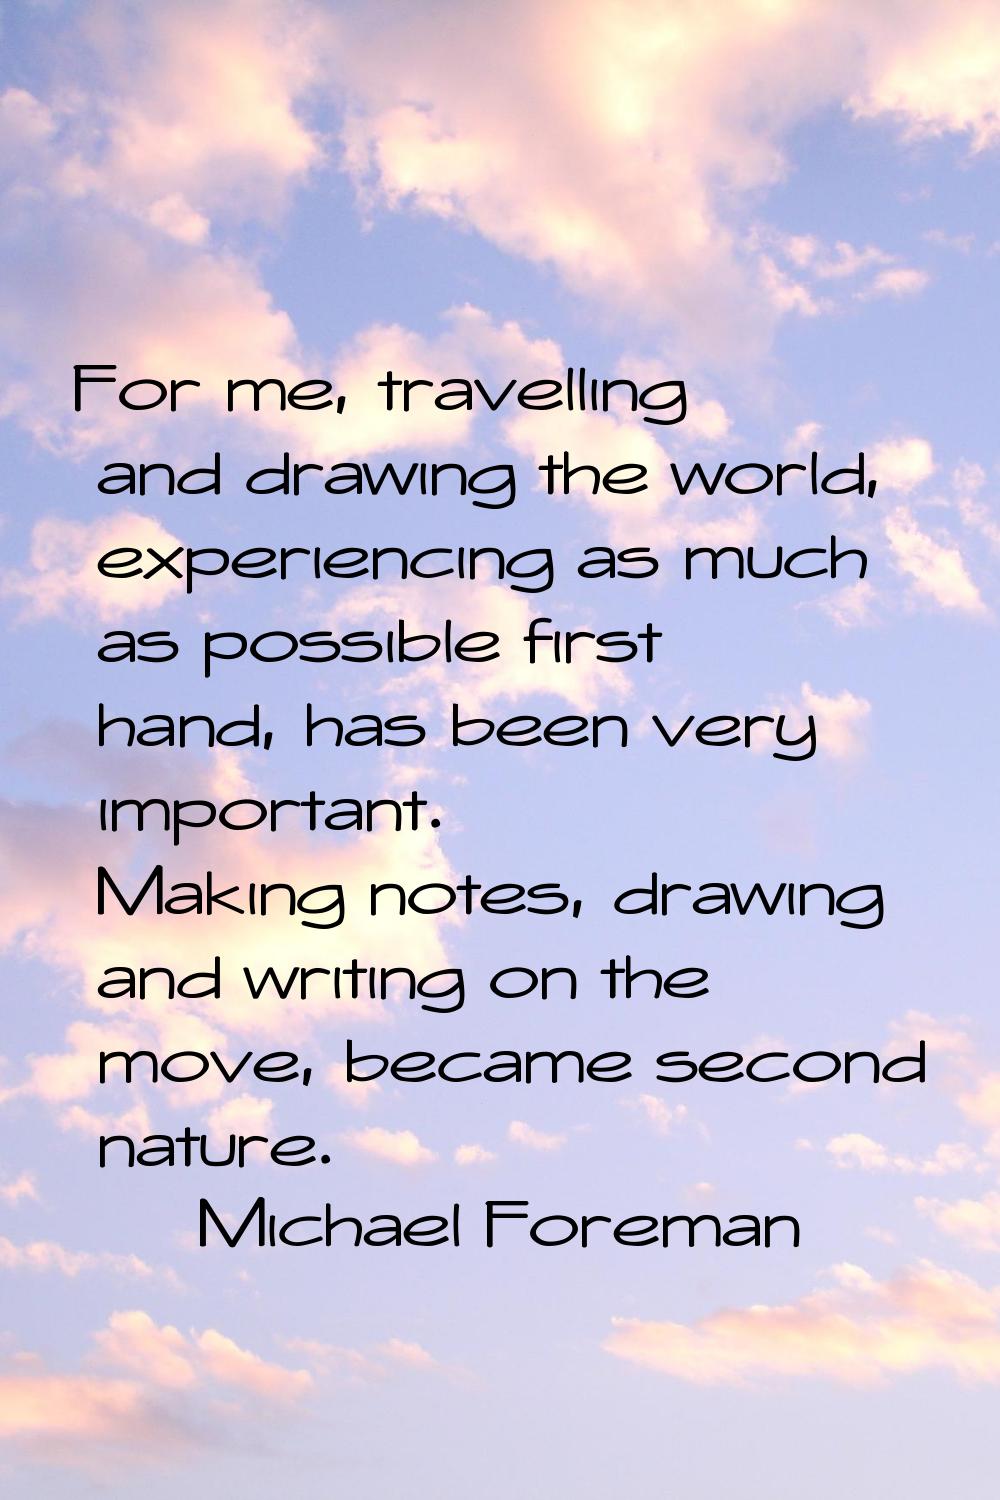 For me, travelling and drawing the world, experiencing as much as possible first hand, has been ver